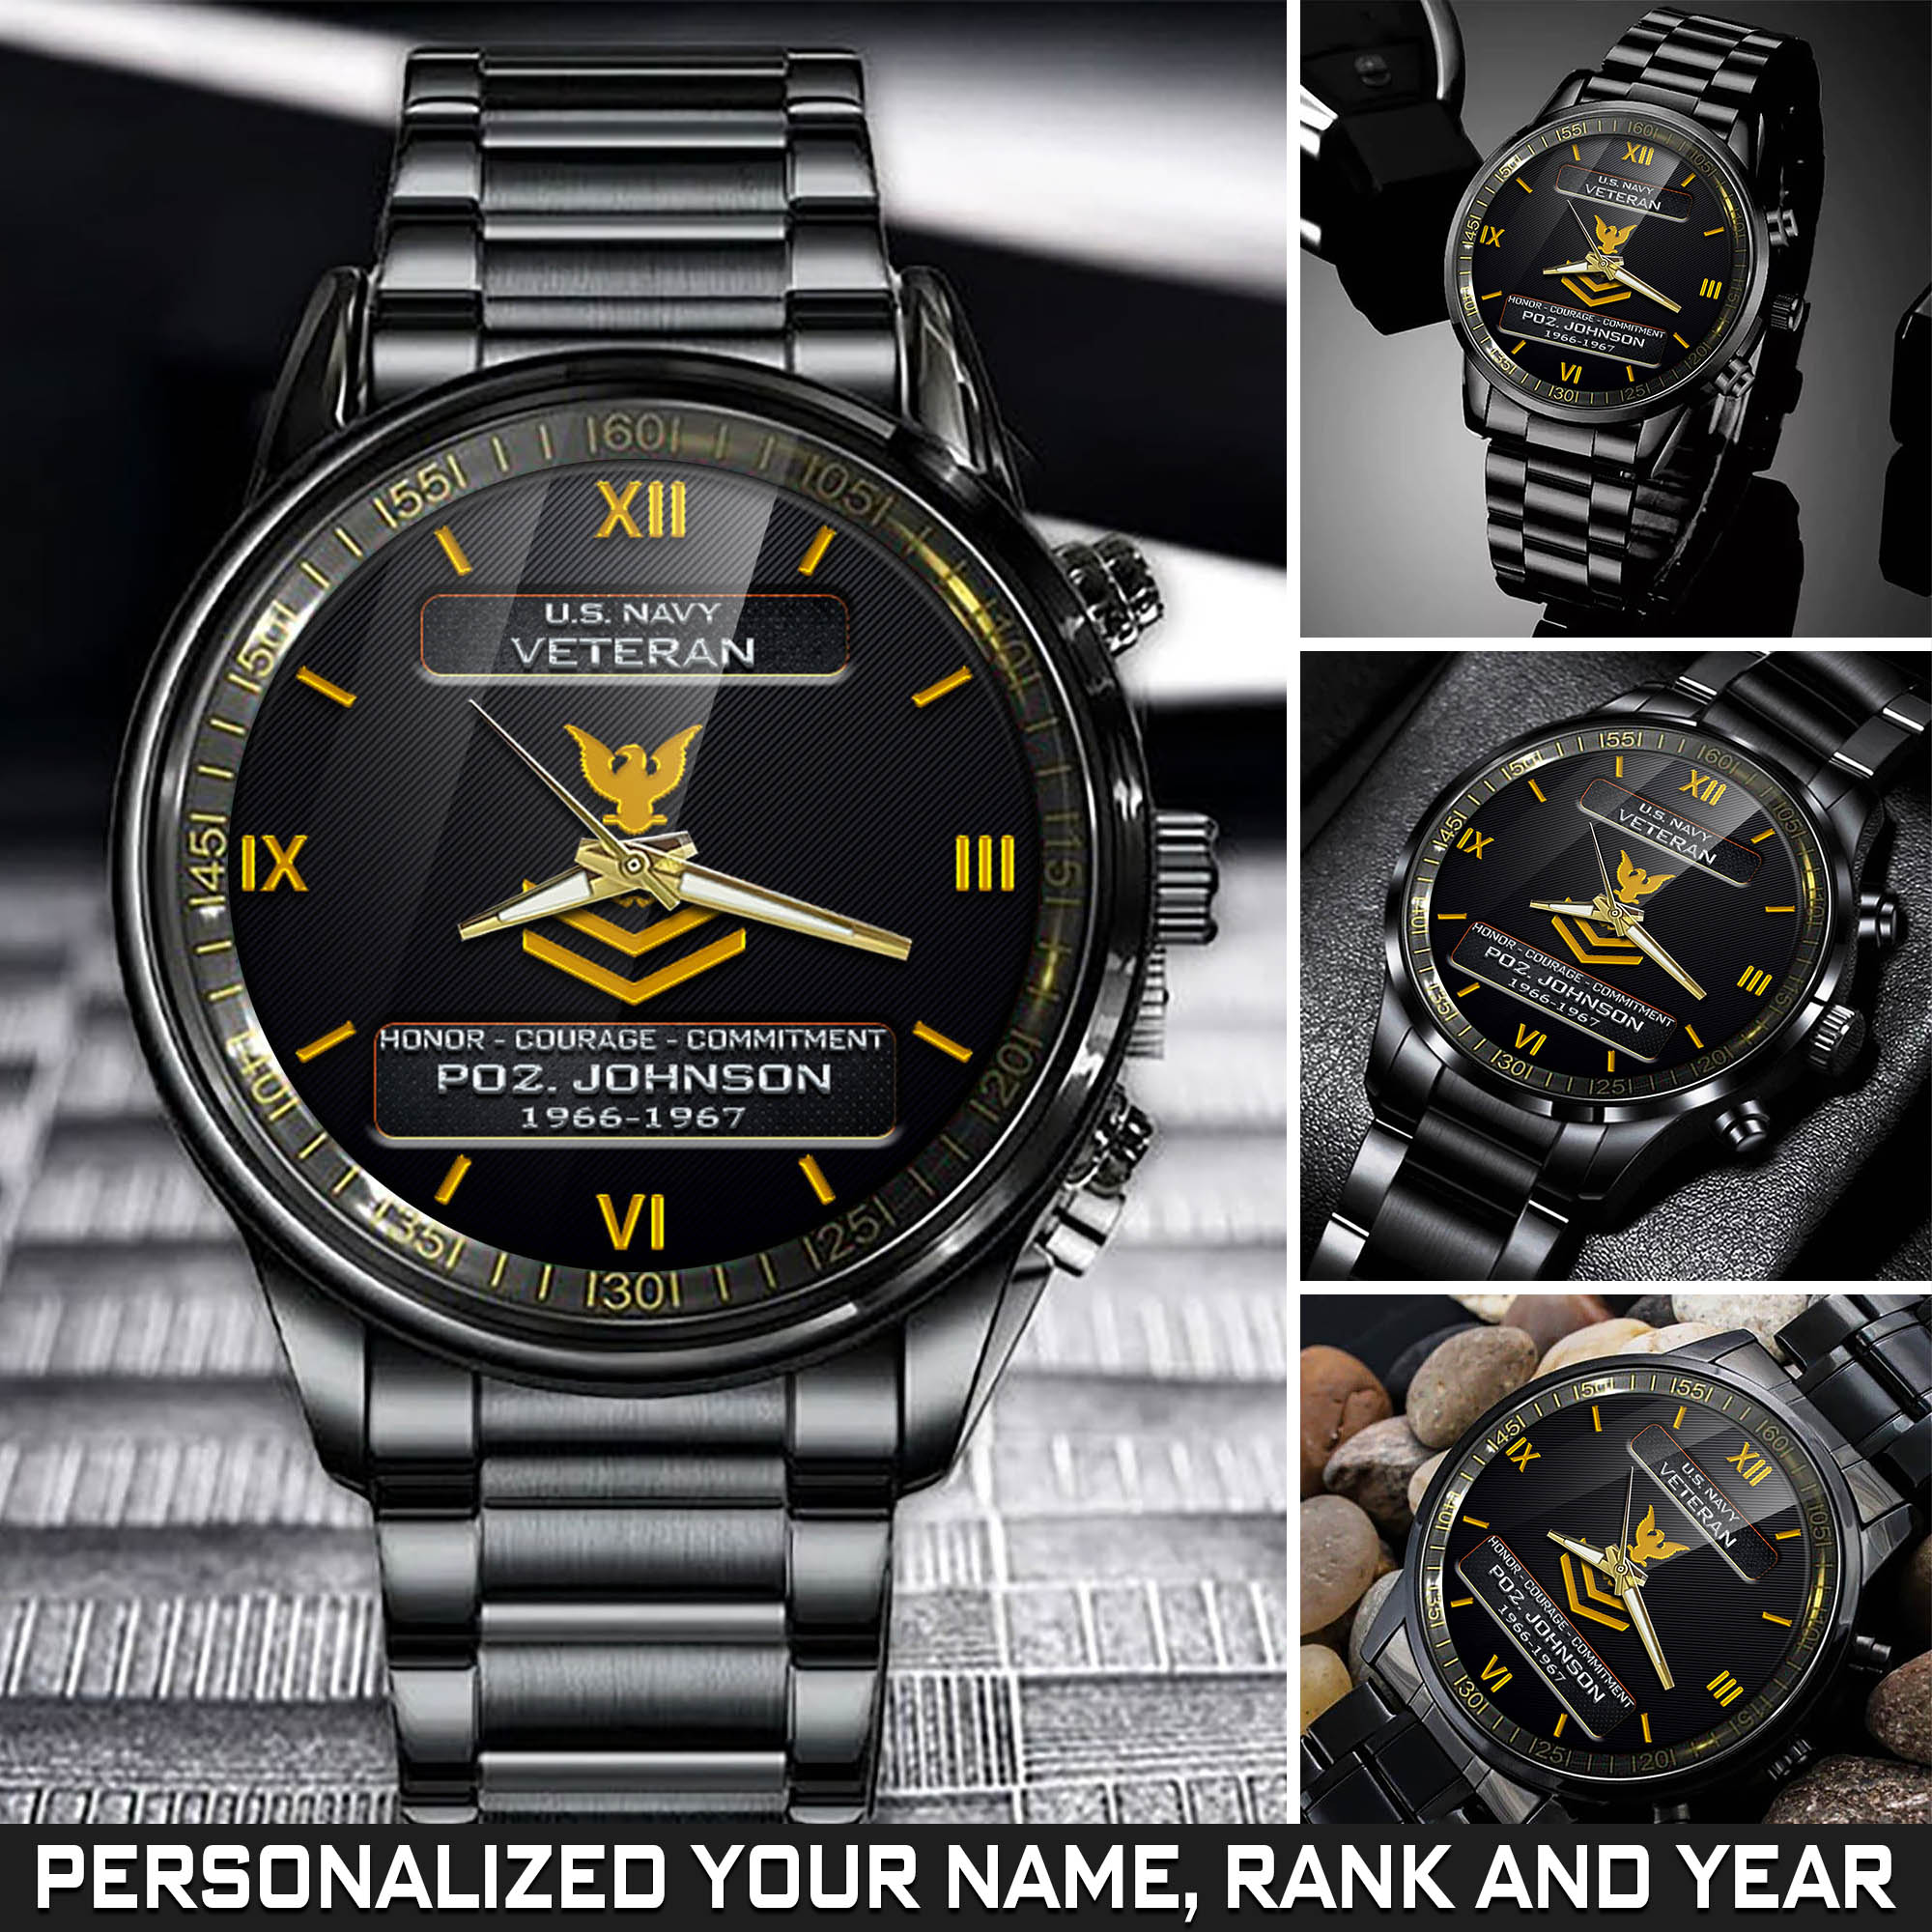 Personalized U.S. Navy Veteran Black Fashion Watch With Your Name, Year And Rank, Military Watch For Veterans, Gift For Veterans ETHY-57684